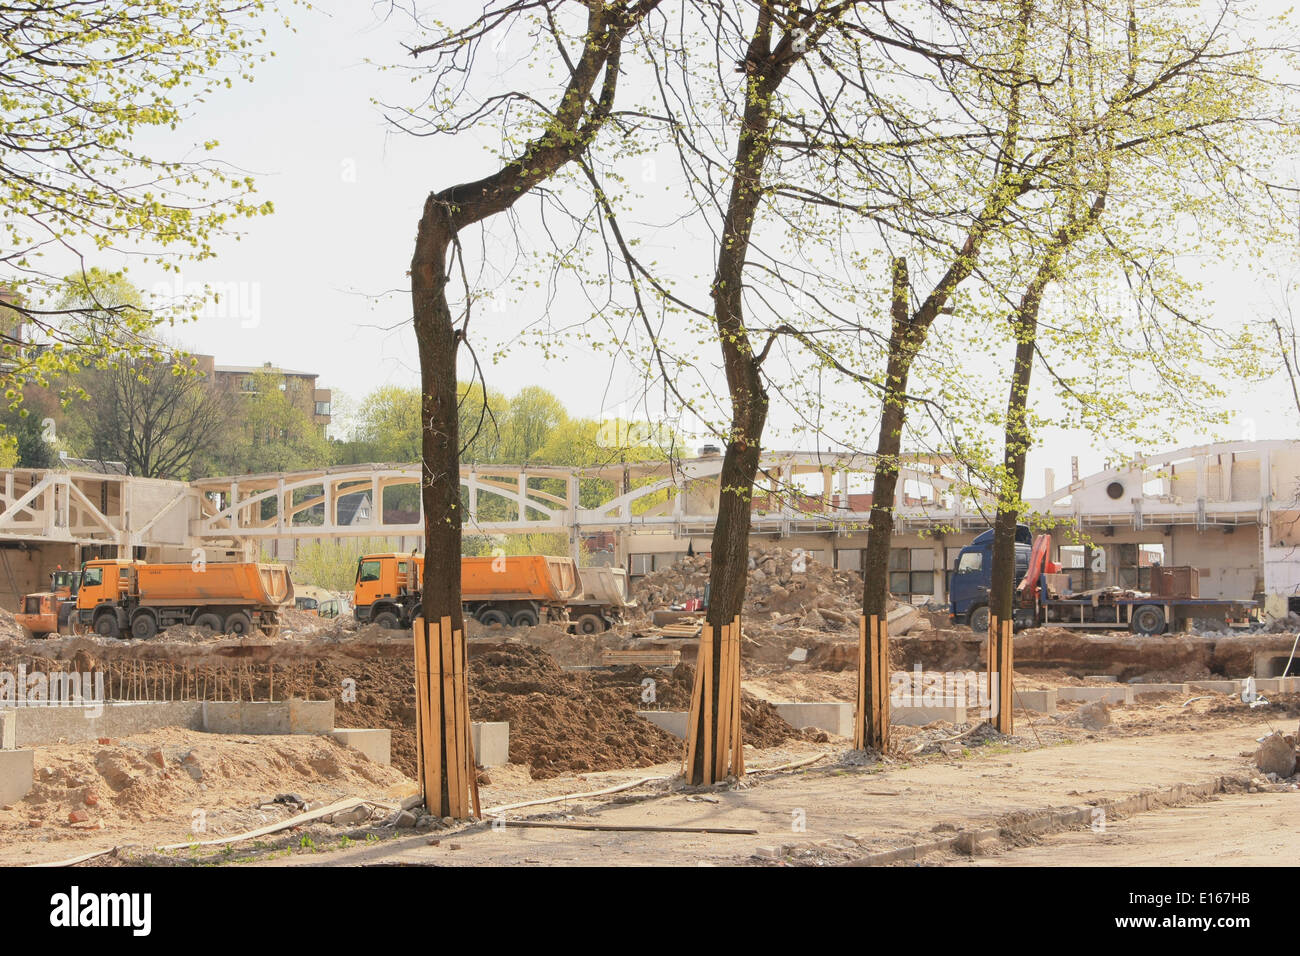 Construction site view with trees Stock Photo